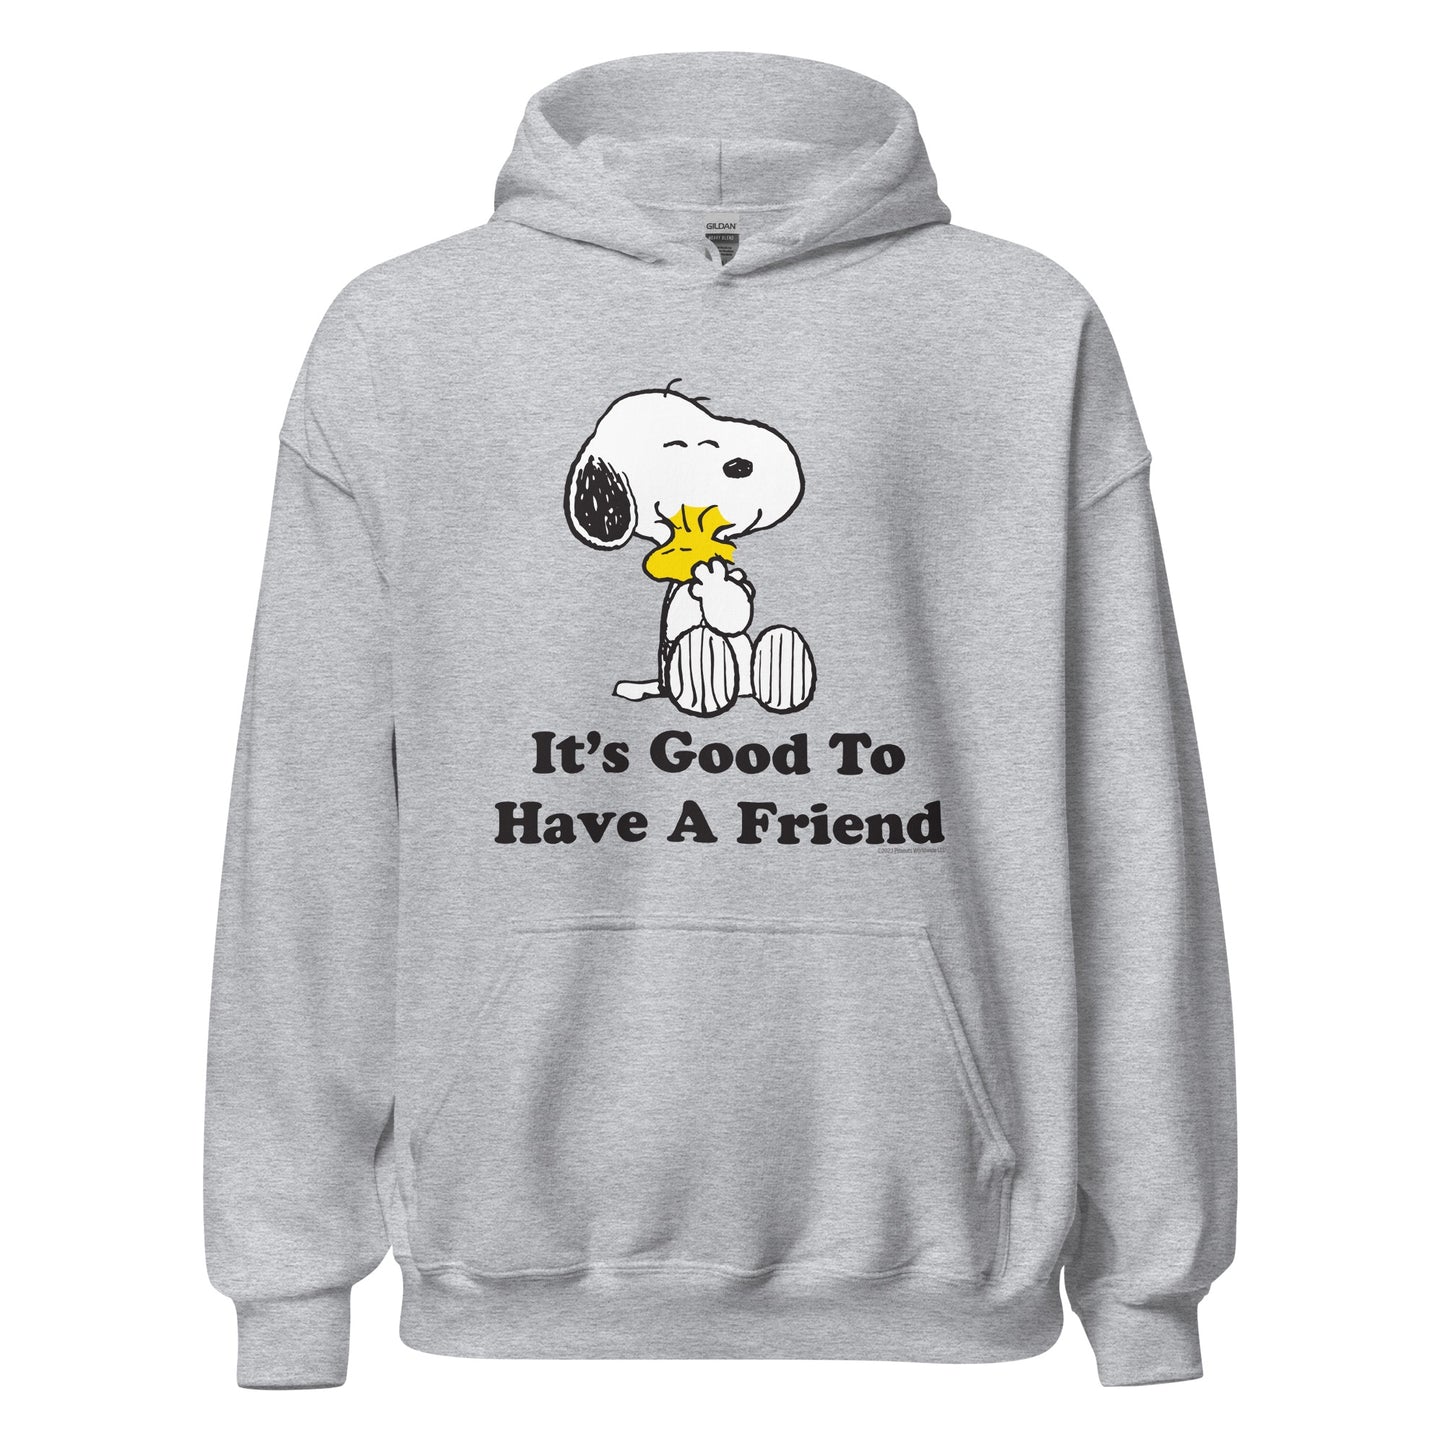 It's Good To Have A Friend Adult Hoodie